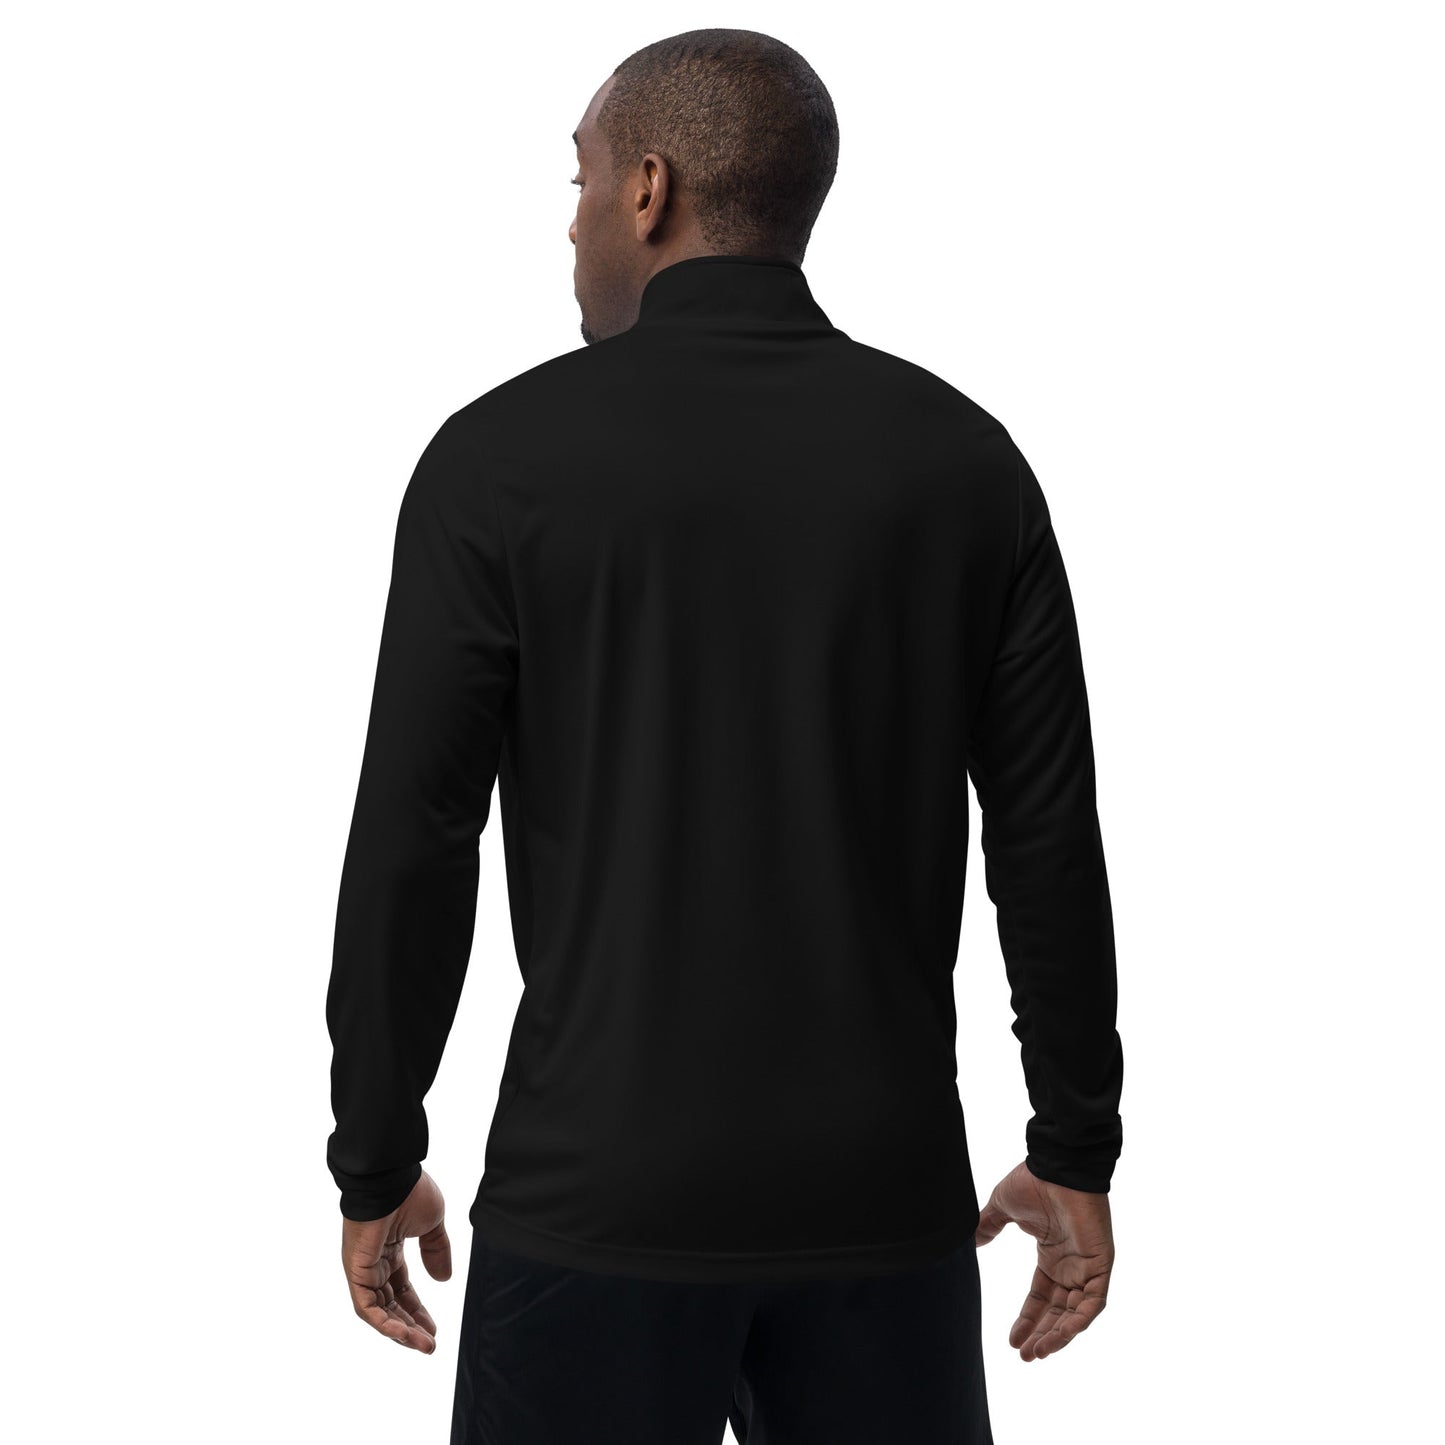 Ridley Teacher- Adidas Quarter zip pullover- Embroidered Chest and Arms